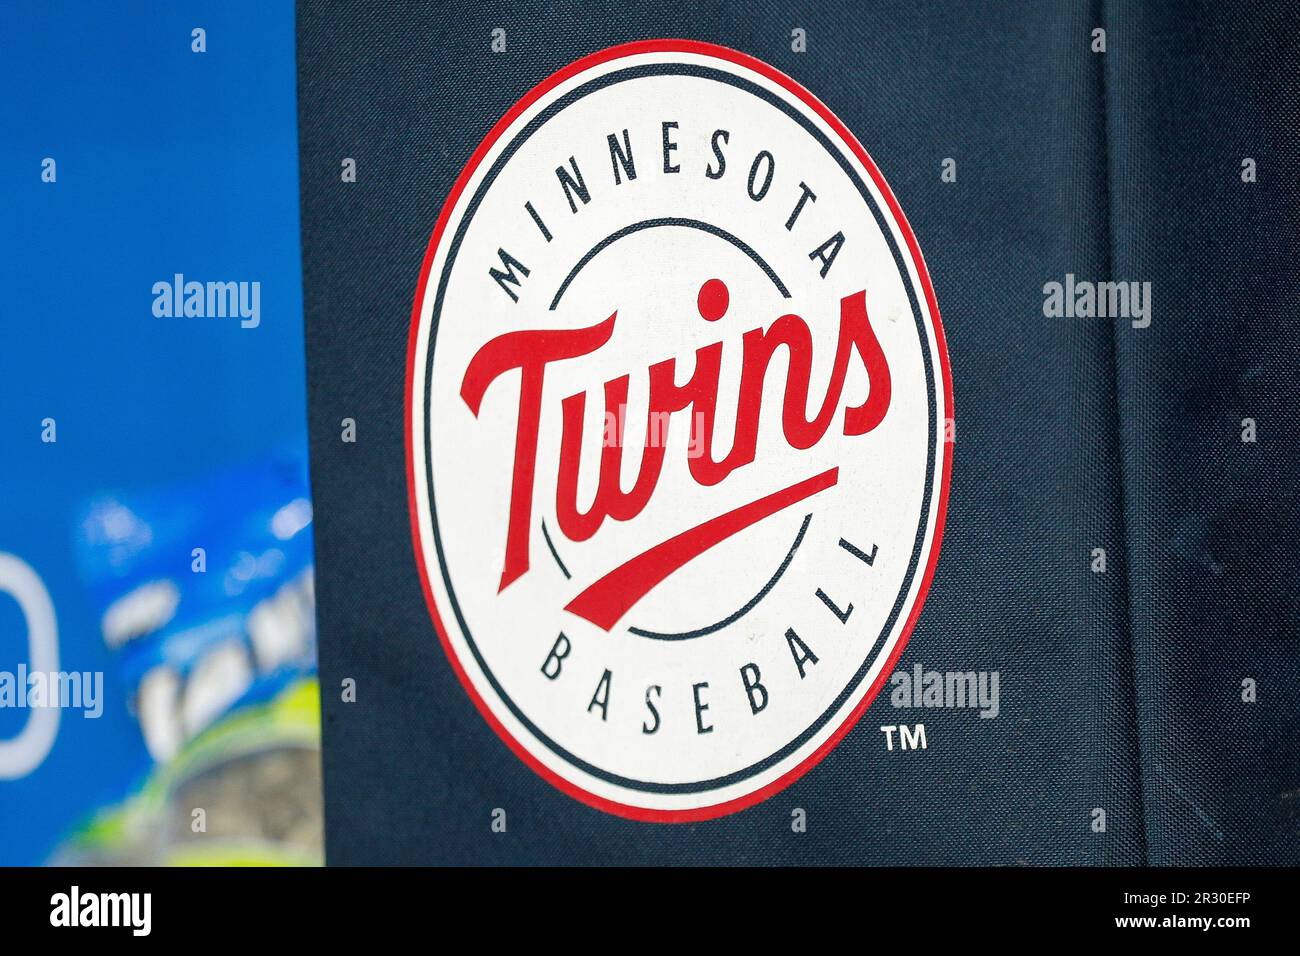 LOS ANGELES, CA - MAY 16: Detailed view of a Minnesota Twins logo